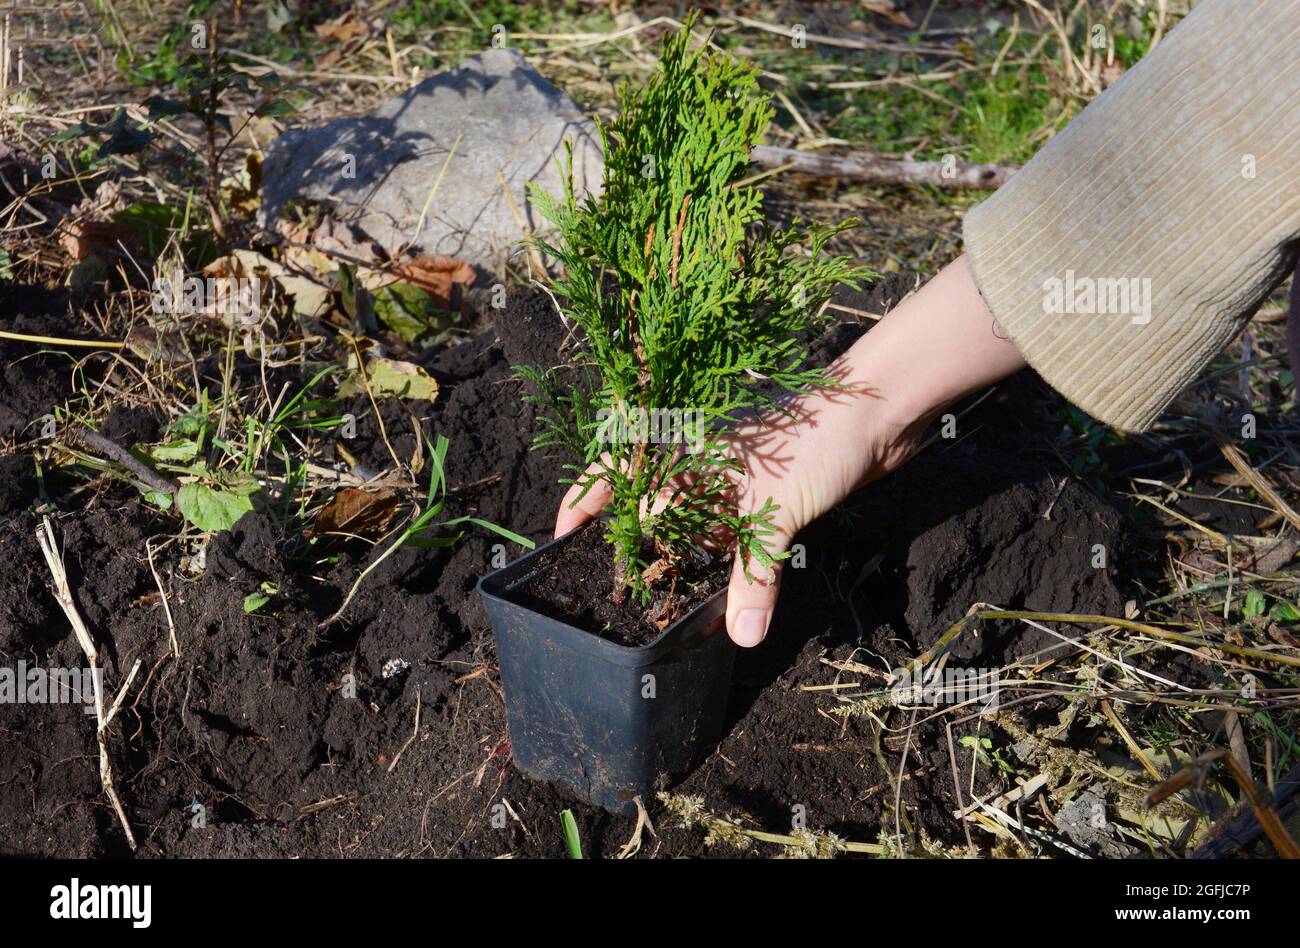 A gardener is planting a small sapling Thuja occidentalis Emerald Green, Smaragd Arborvitae from a pot into soil. Stock Photo